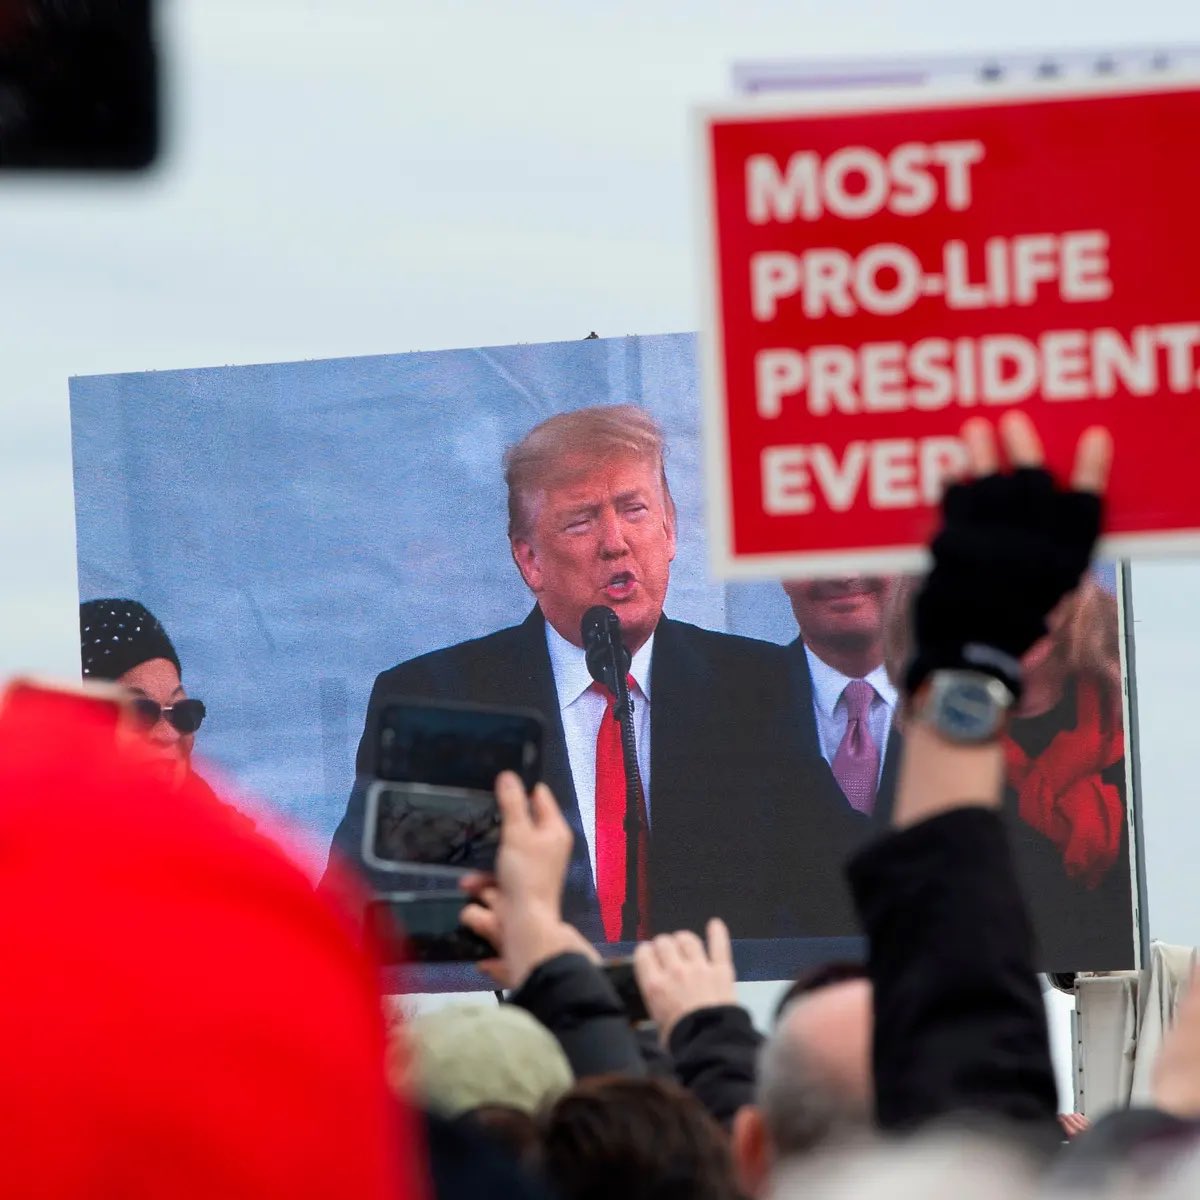 President Trump’s comments on abortion are consistent with what the pro-life community had been saying for decades before Roe was overturned. Remember, let’s be honest: BEFORE Roe went away, the entire pro-life community continuously talked about how a reversal of Roe would…